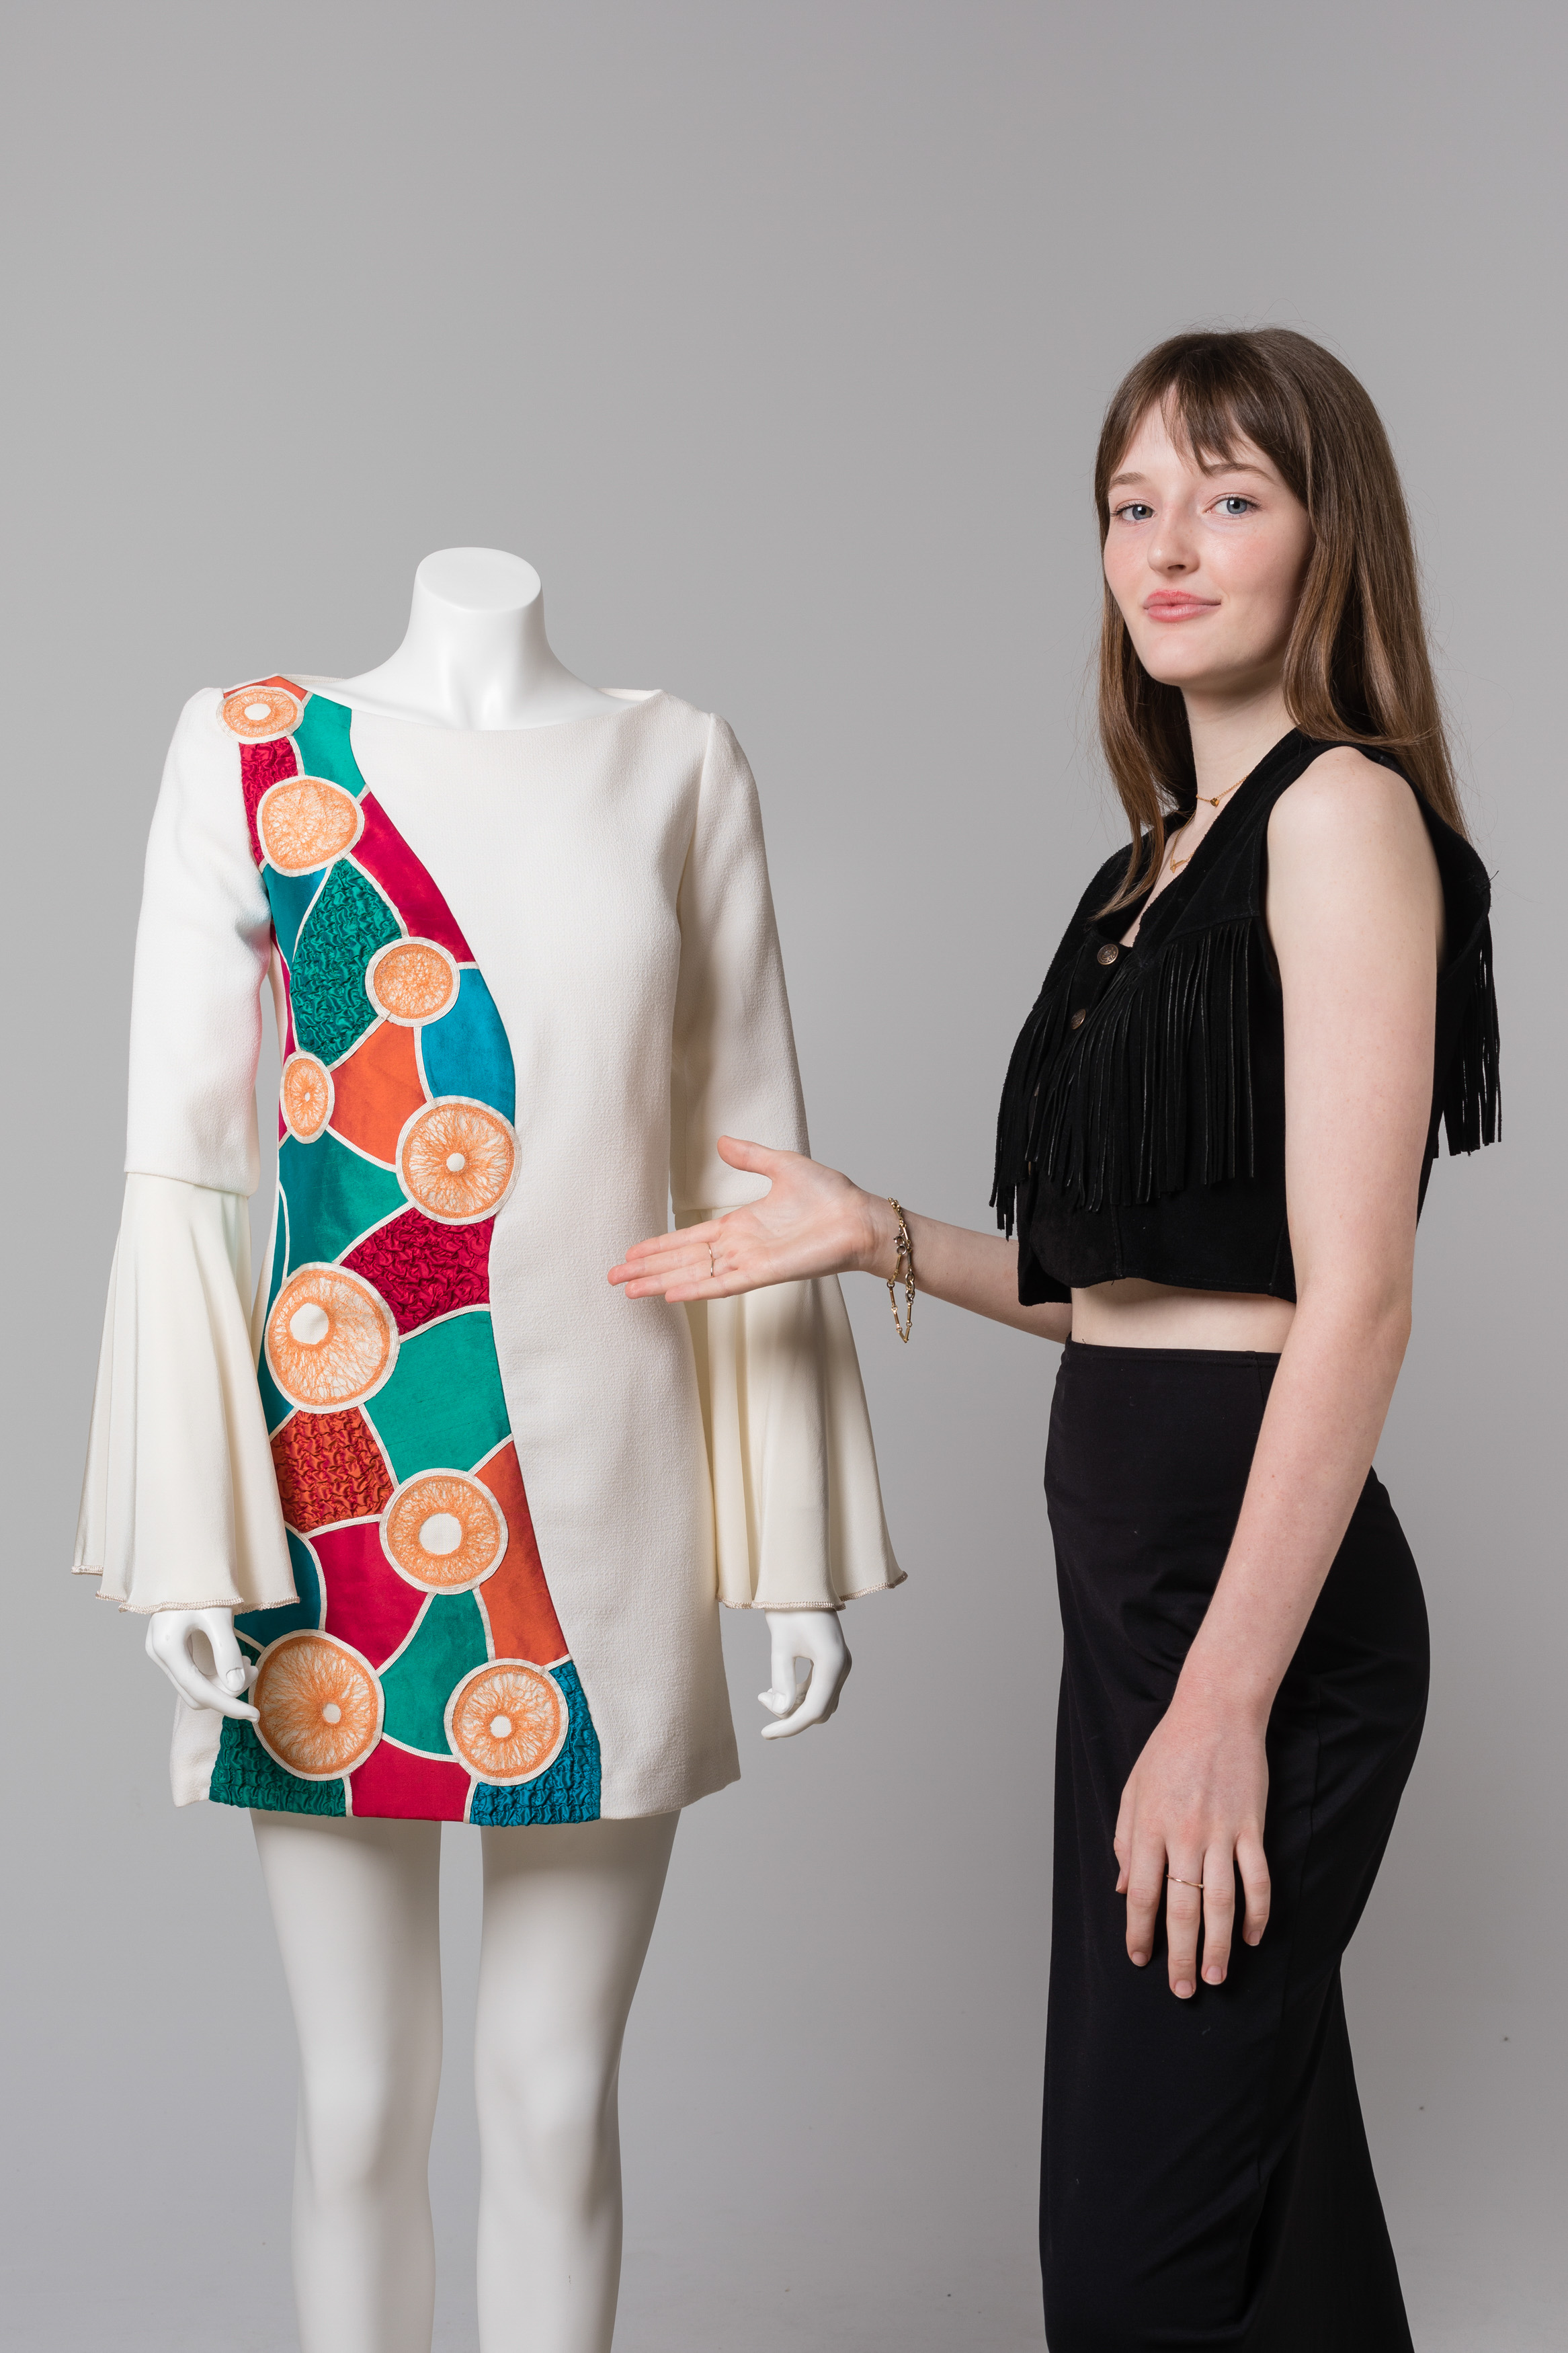 A young woman gesturing to a mannequin beside her. The mannequin wears a long sleeved dress with a colourful pattern down one side and white fabric on the other.